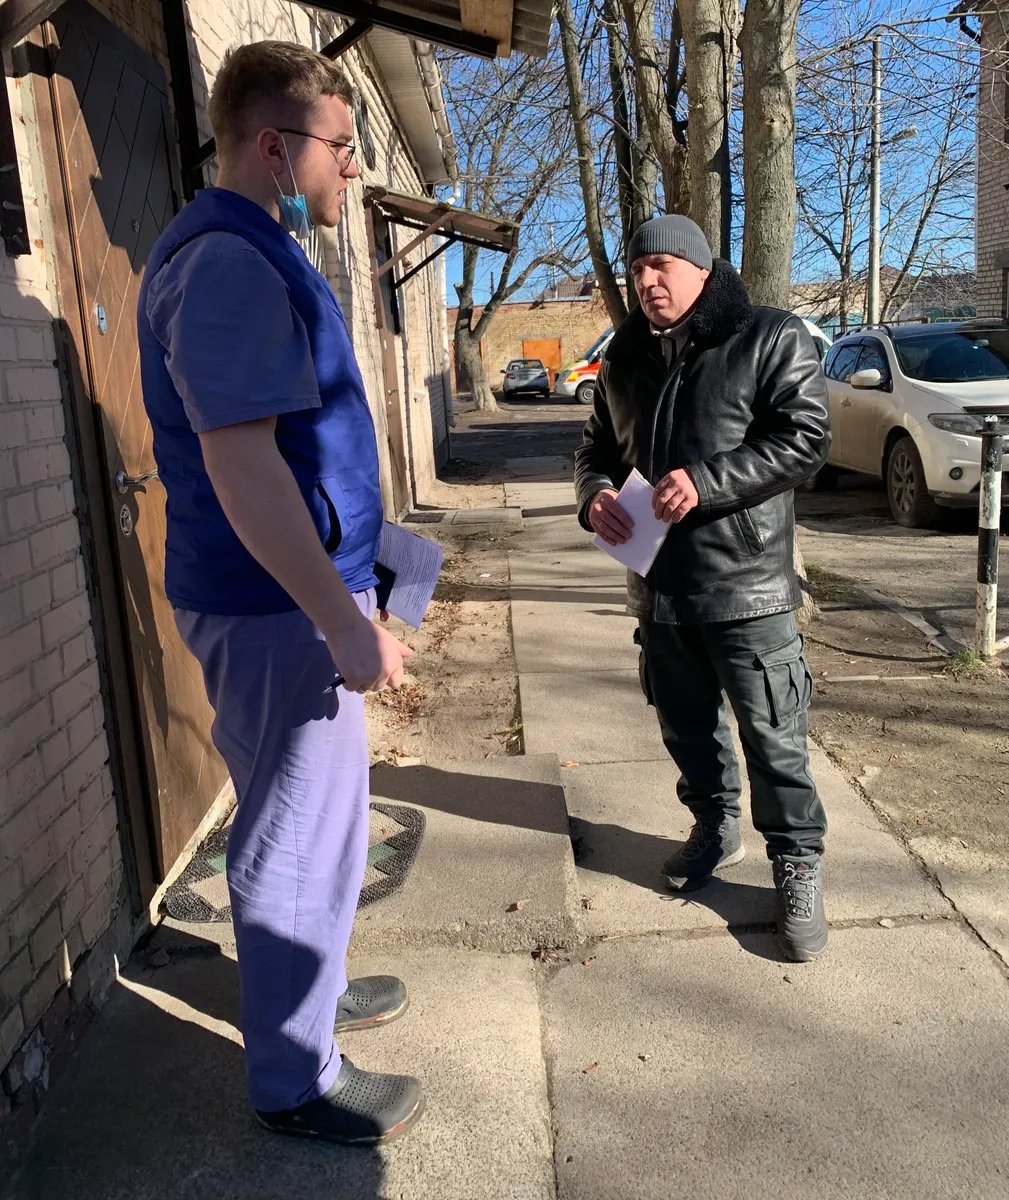 Serhiy Lyakhovich explains to a brother of a missing person what he should do. Photo: Olga Musafirova, exclusively for Novaya Gazeta Europe